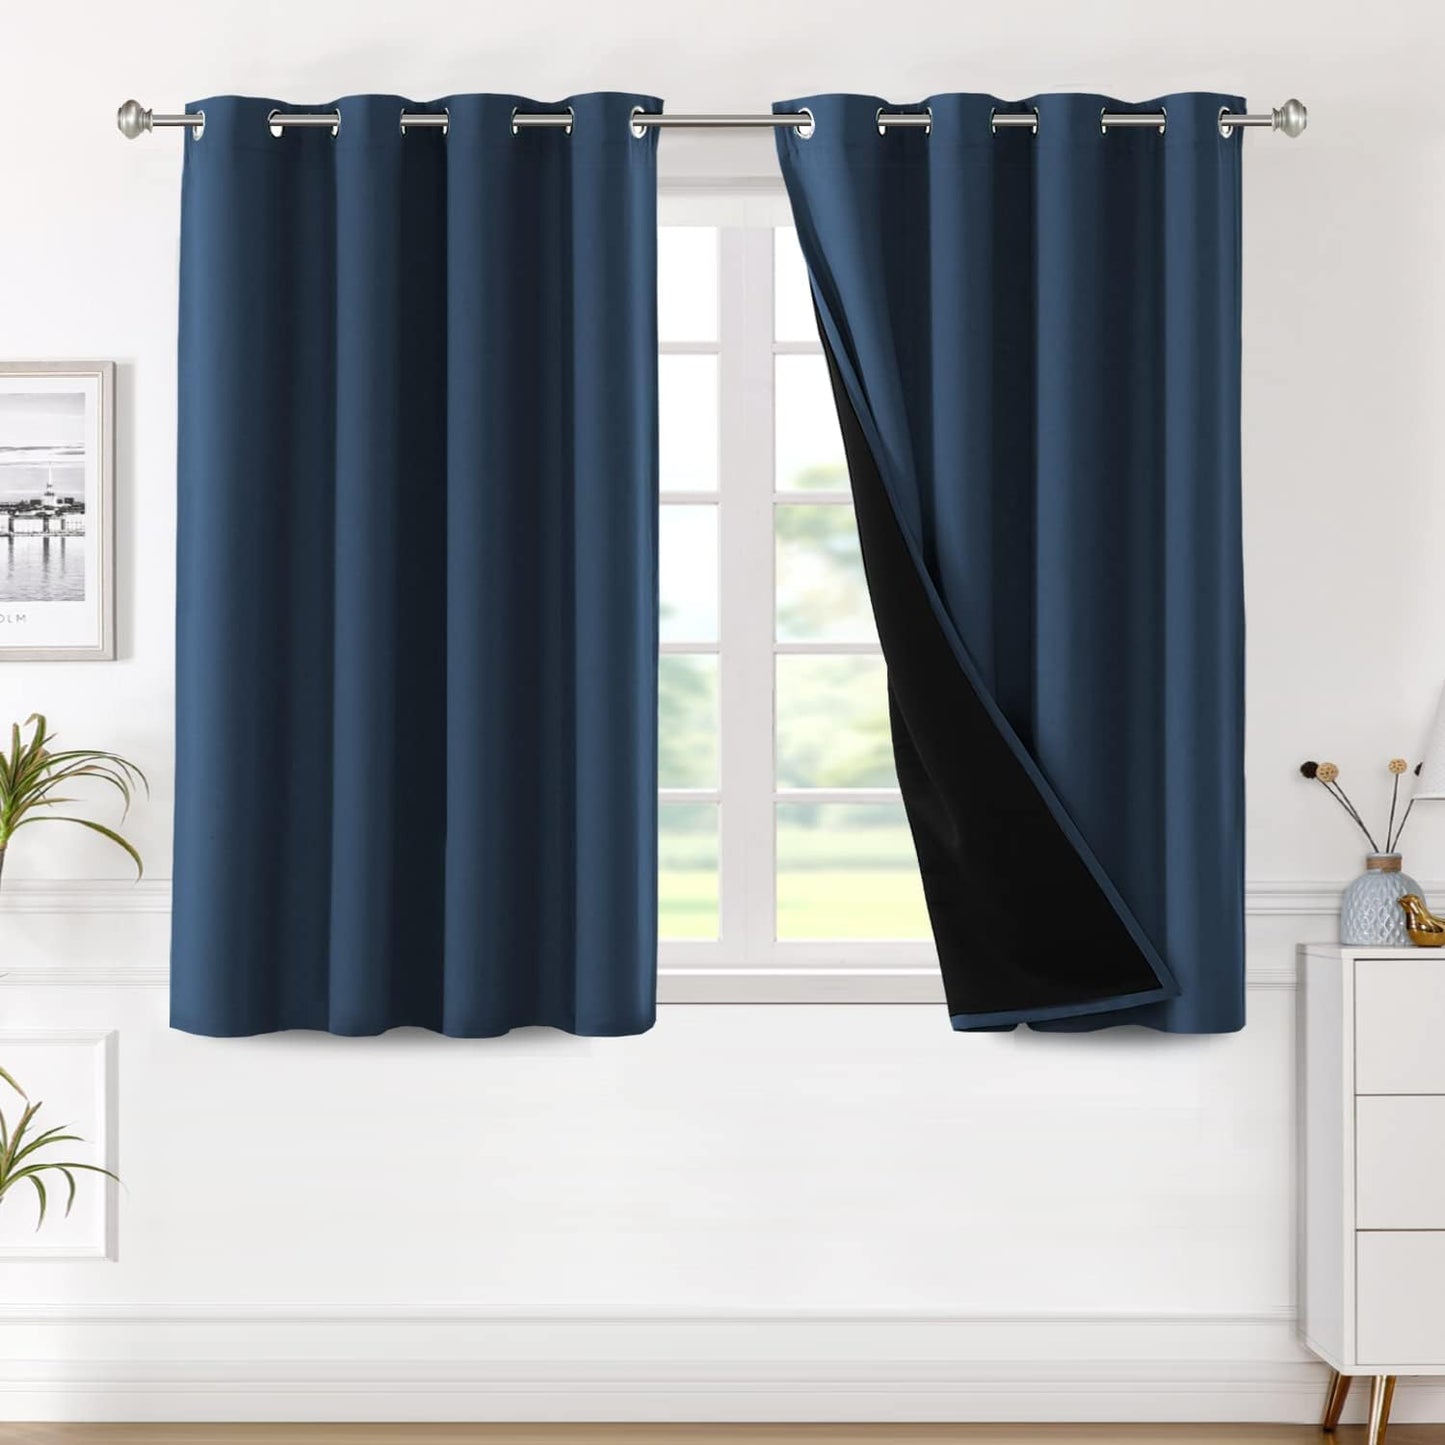 H.VERSAILTEX Blackout Curtains with Liner Backing, Thermal Insulated Curtains for Living Room, Noise Reducing Drapes, White, 52 Inches Wide X 96 Inches Long per Panel, Set of 2 Panels  H.VERSAILTEX Navy Blue 52"W X 45"L 